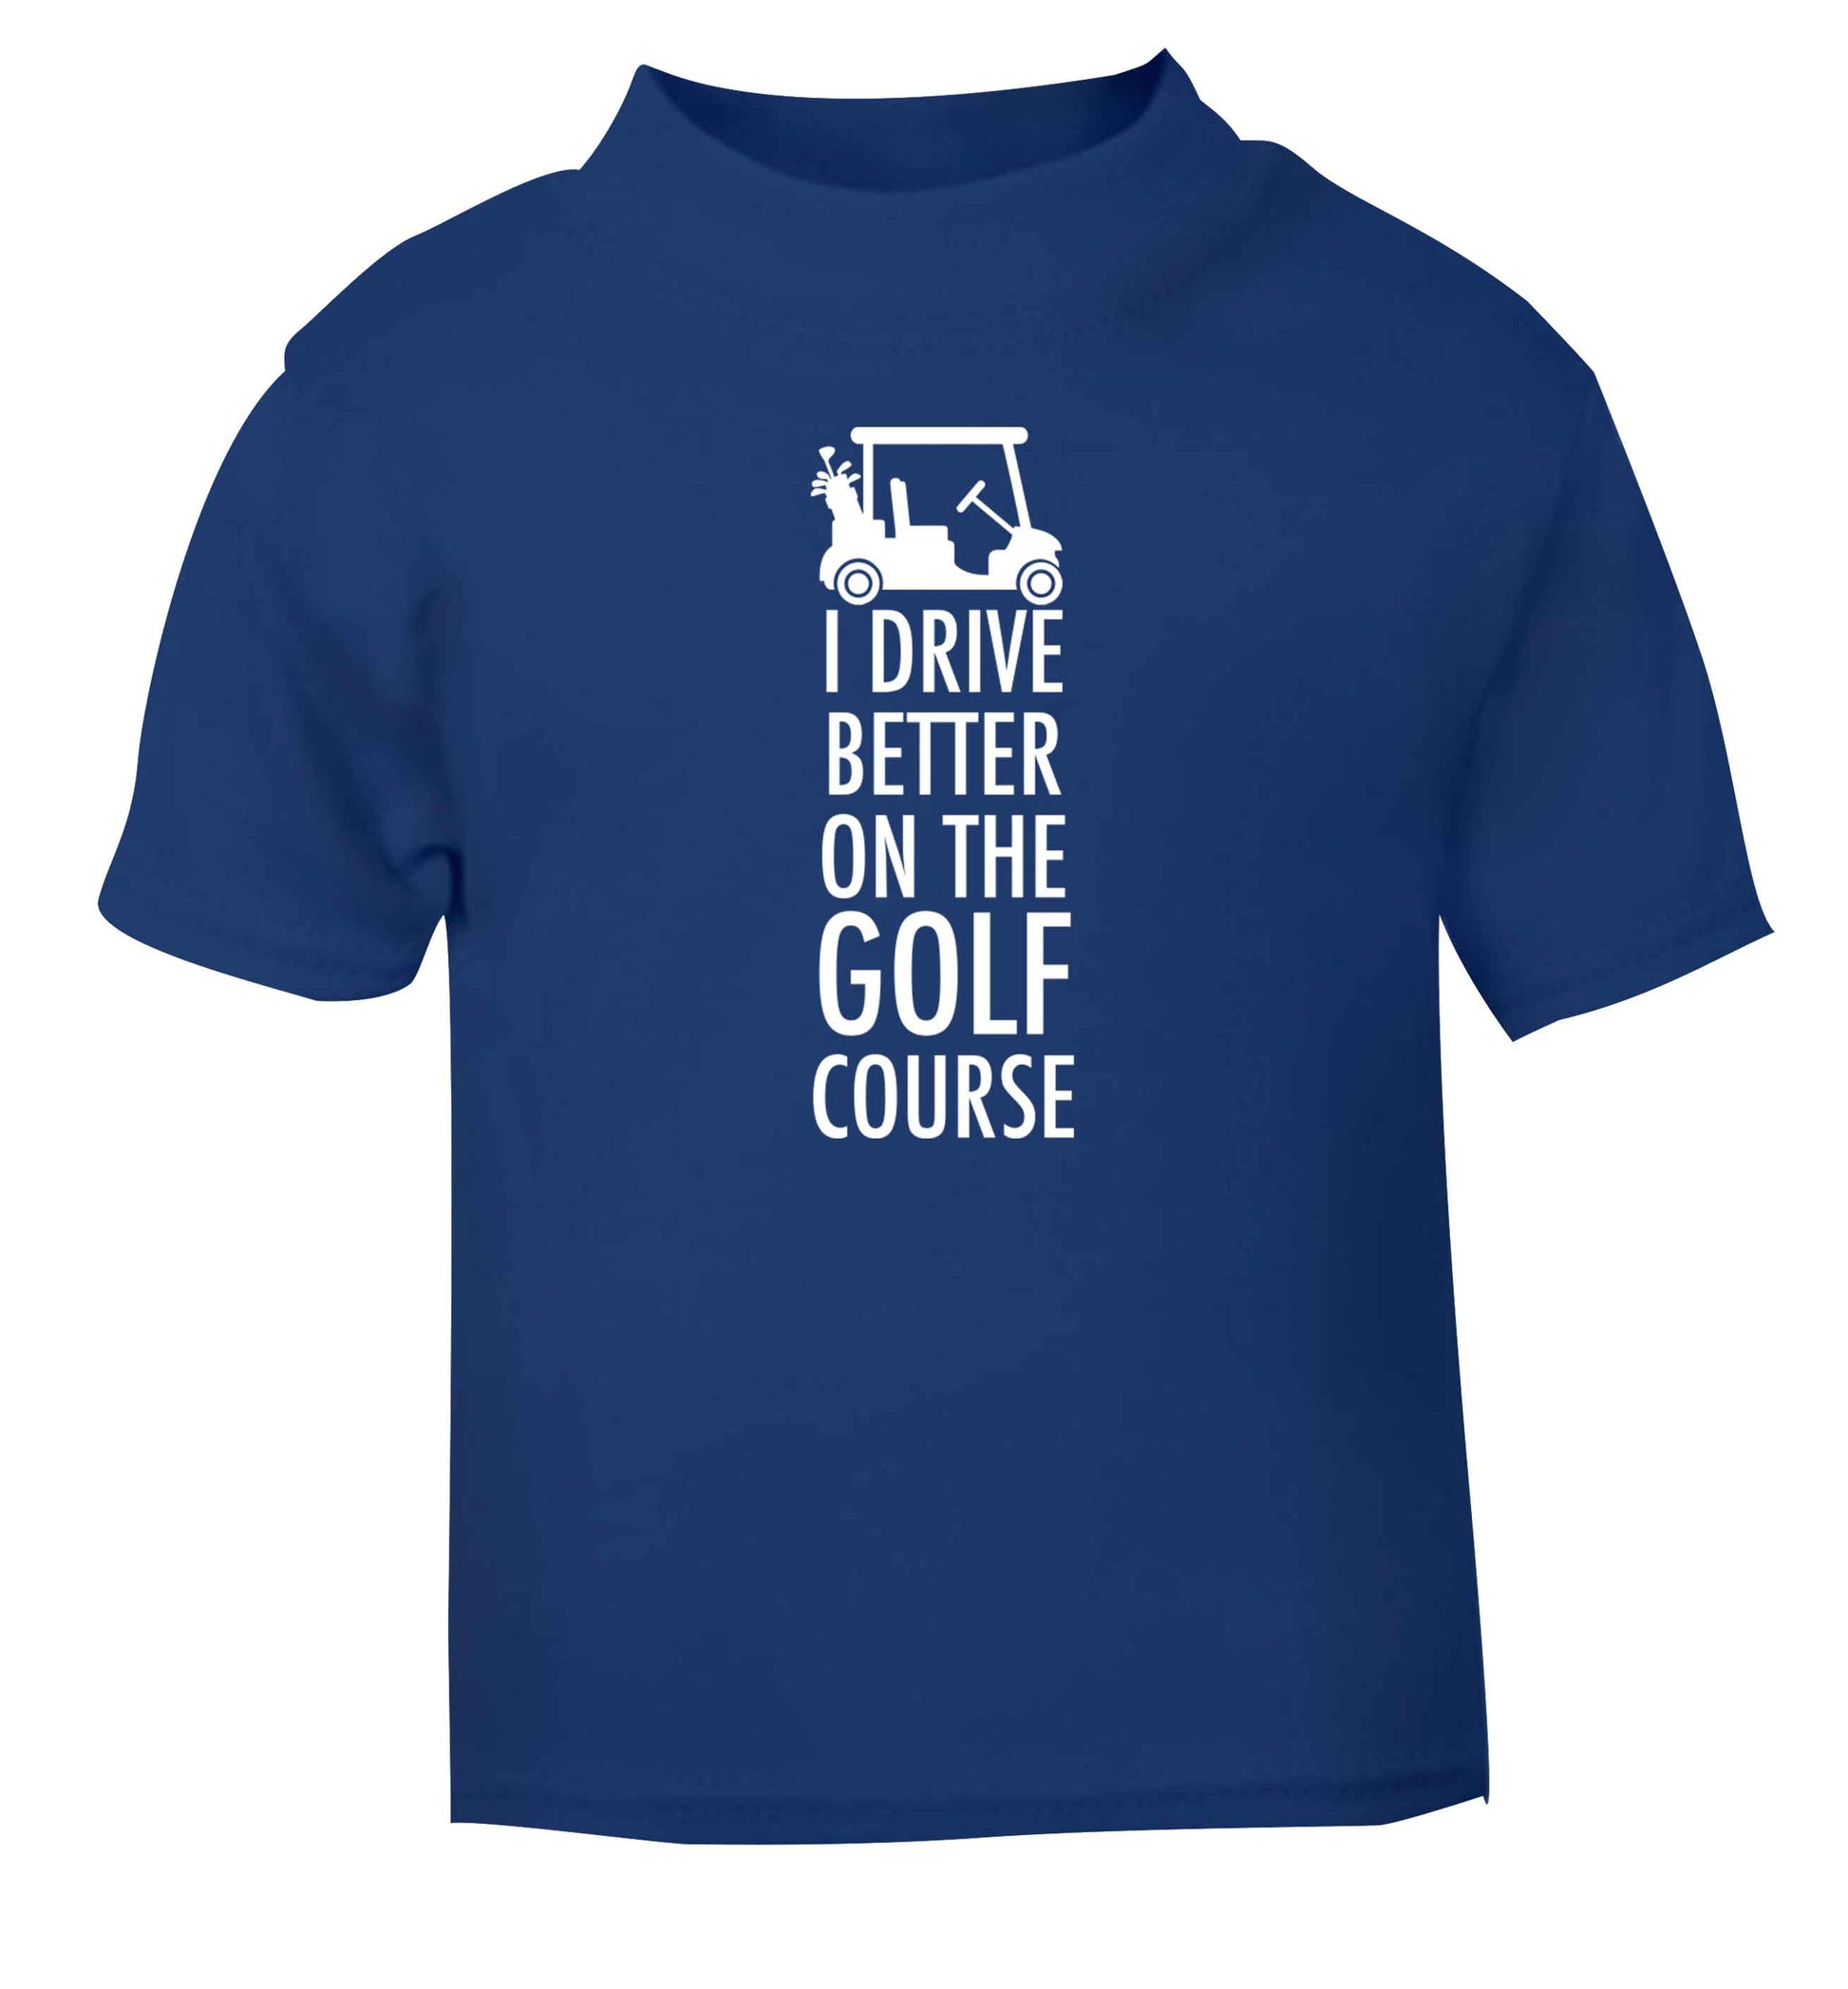 I drive better on the golf course blue Baby Toddler Tshirt 2 Years